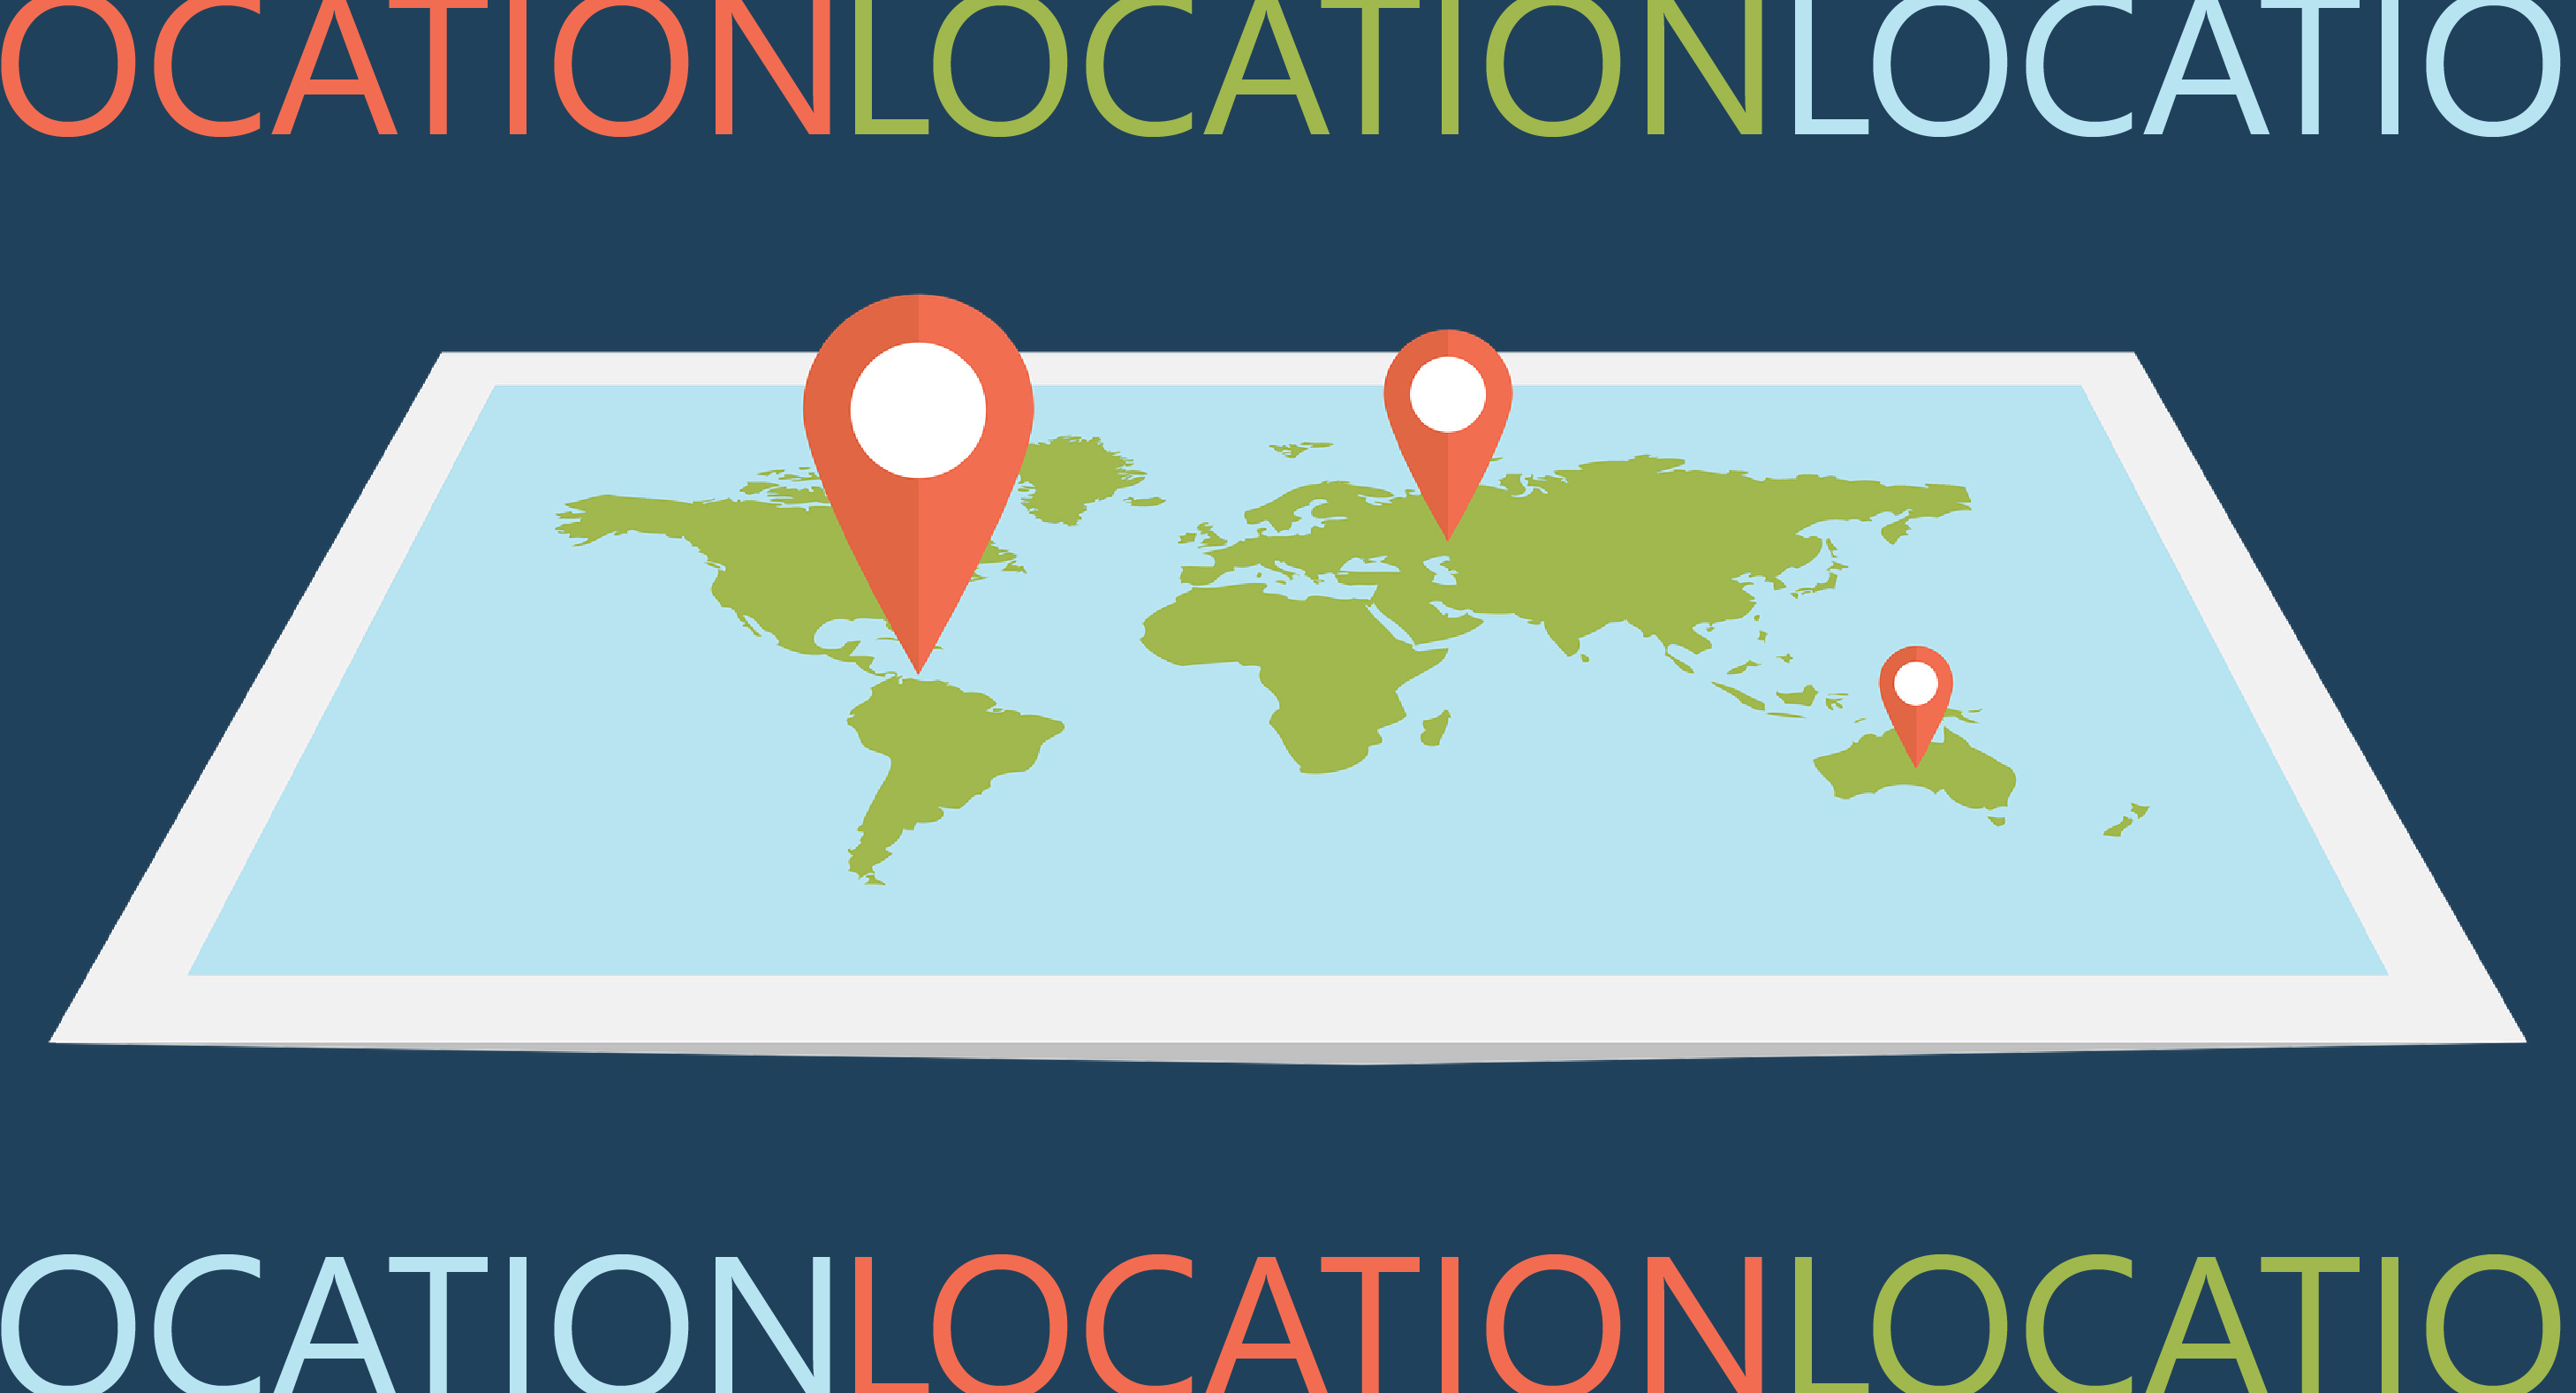 Does Business Location Still Matter In Today’s Digital World?